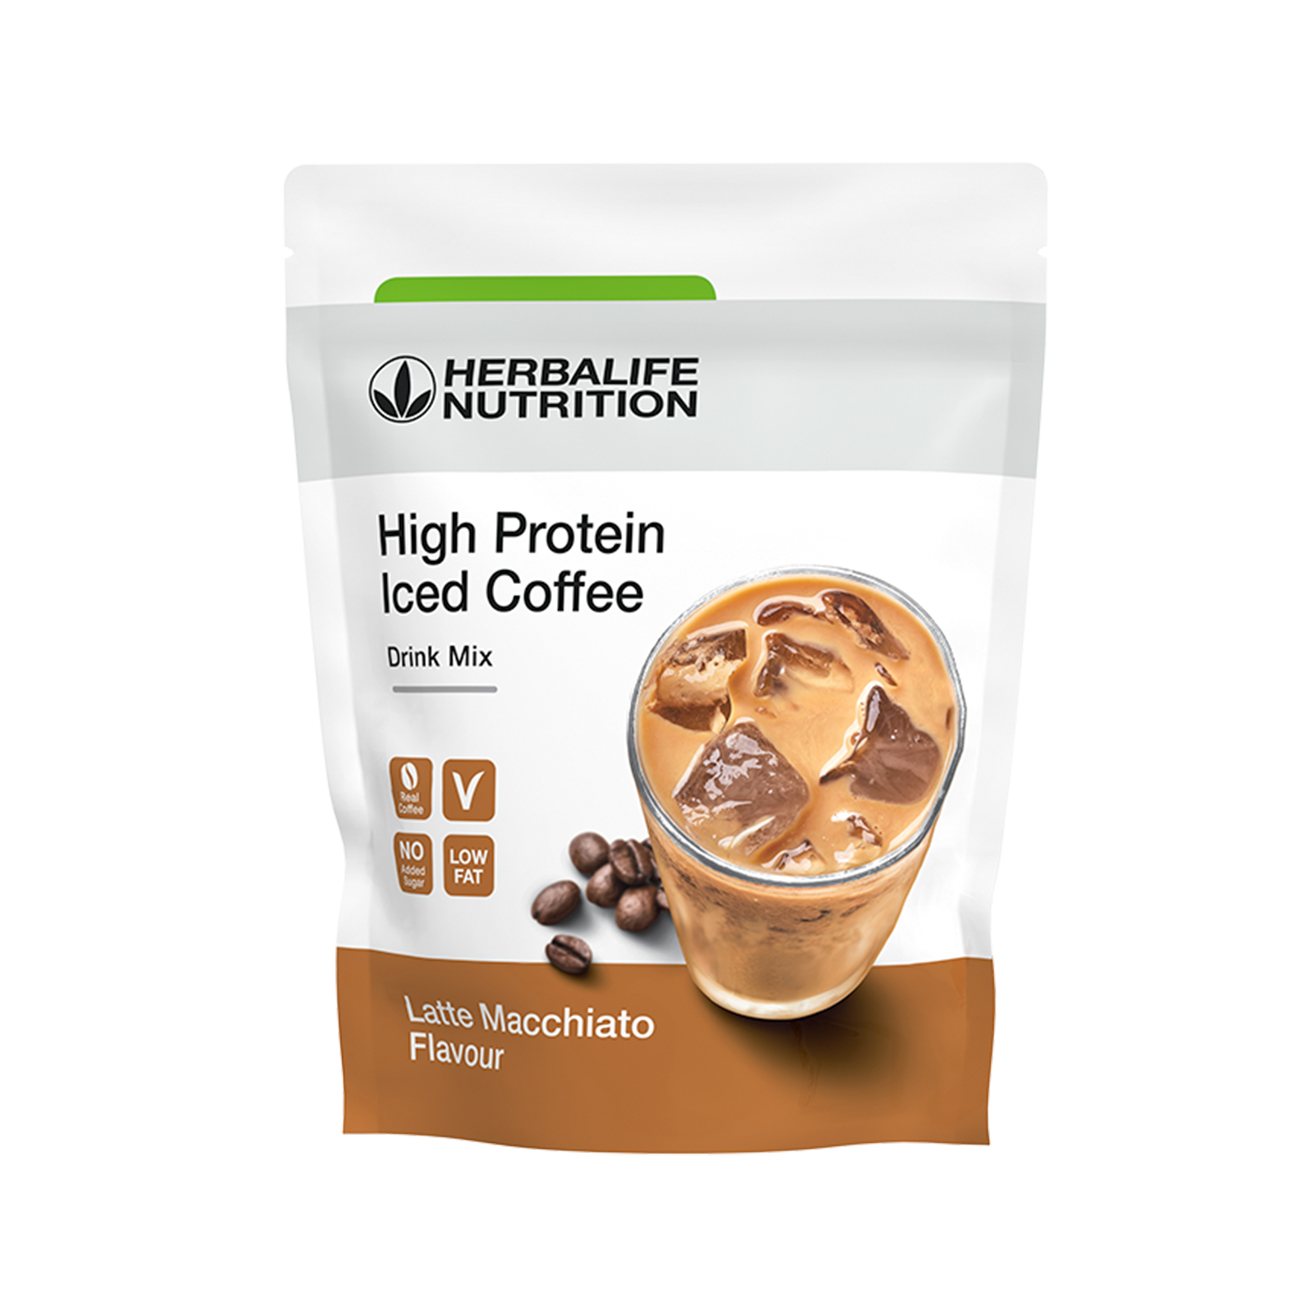 High Protein Iced Coffee  Latte Macchiato product shot